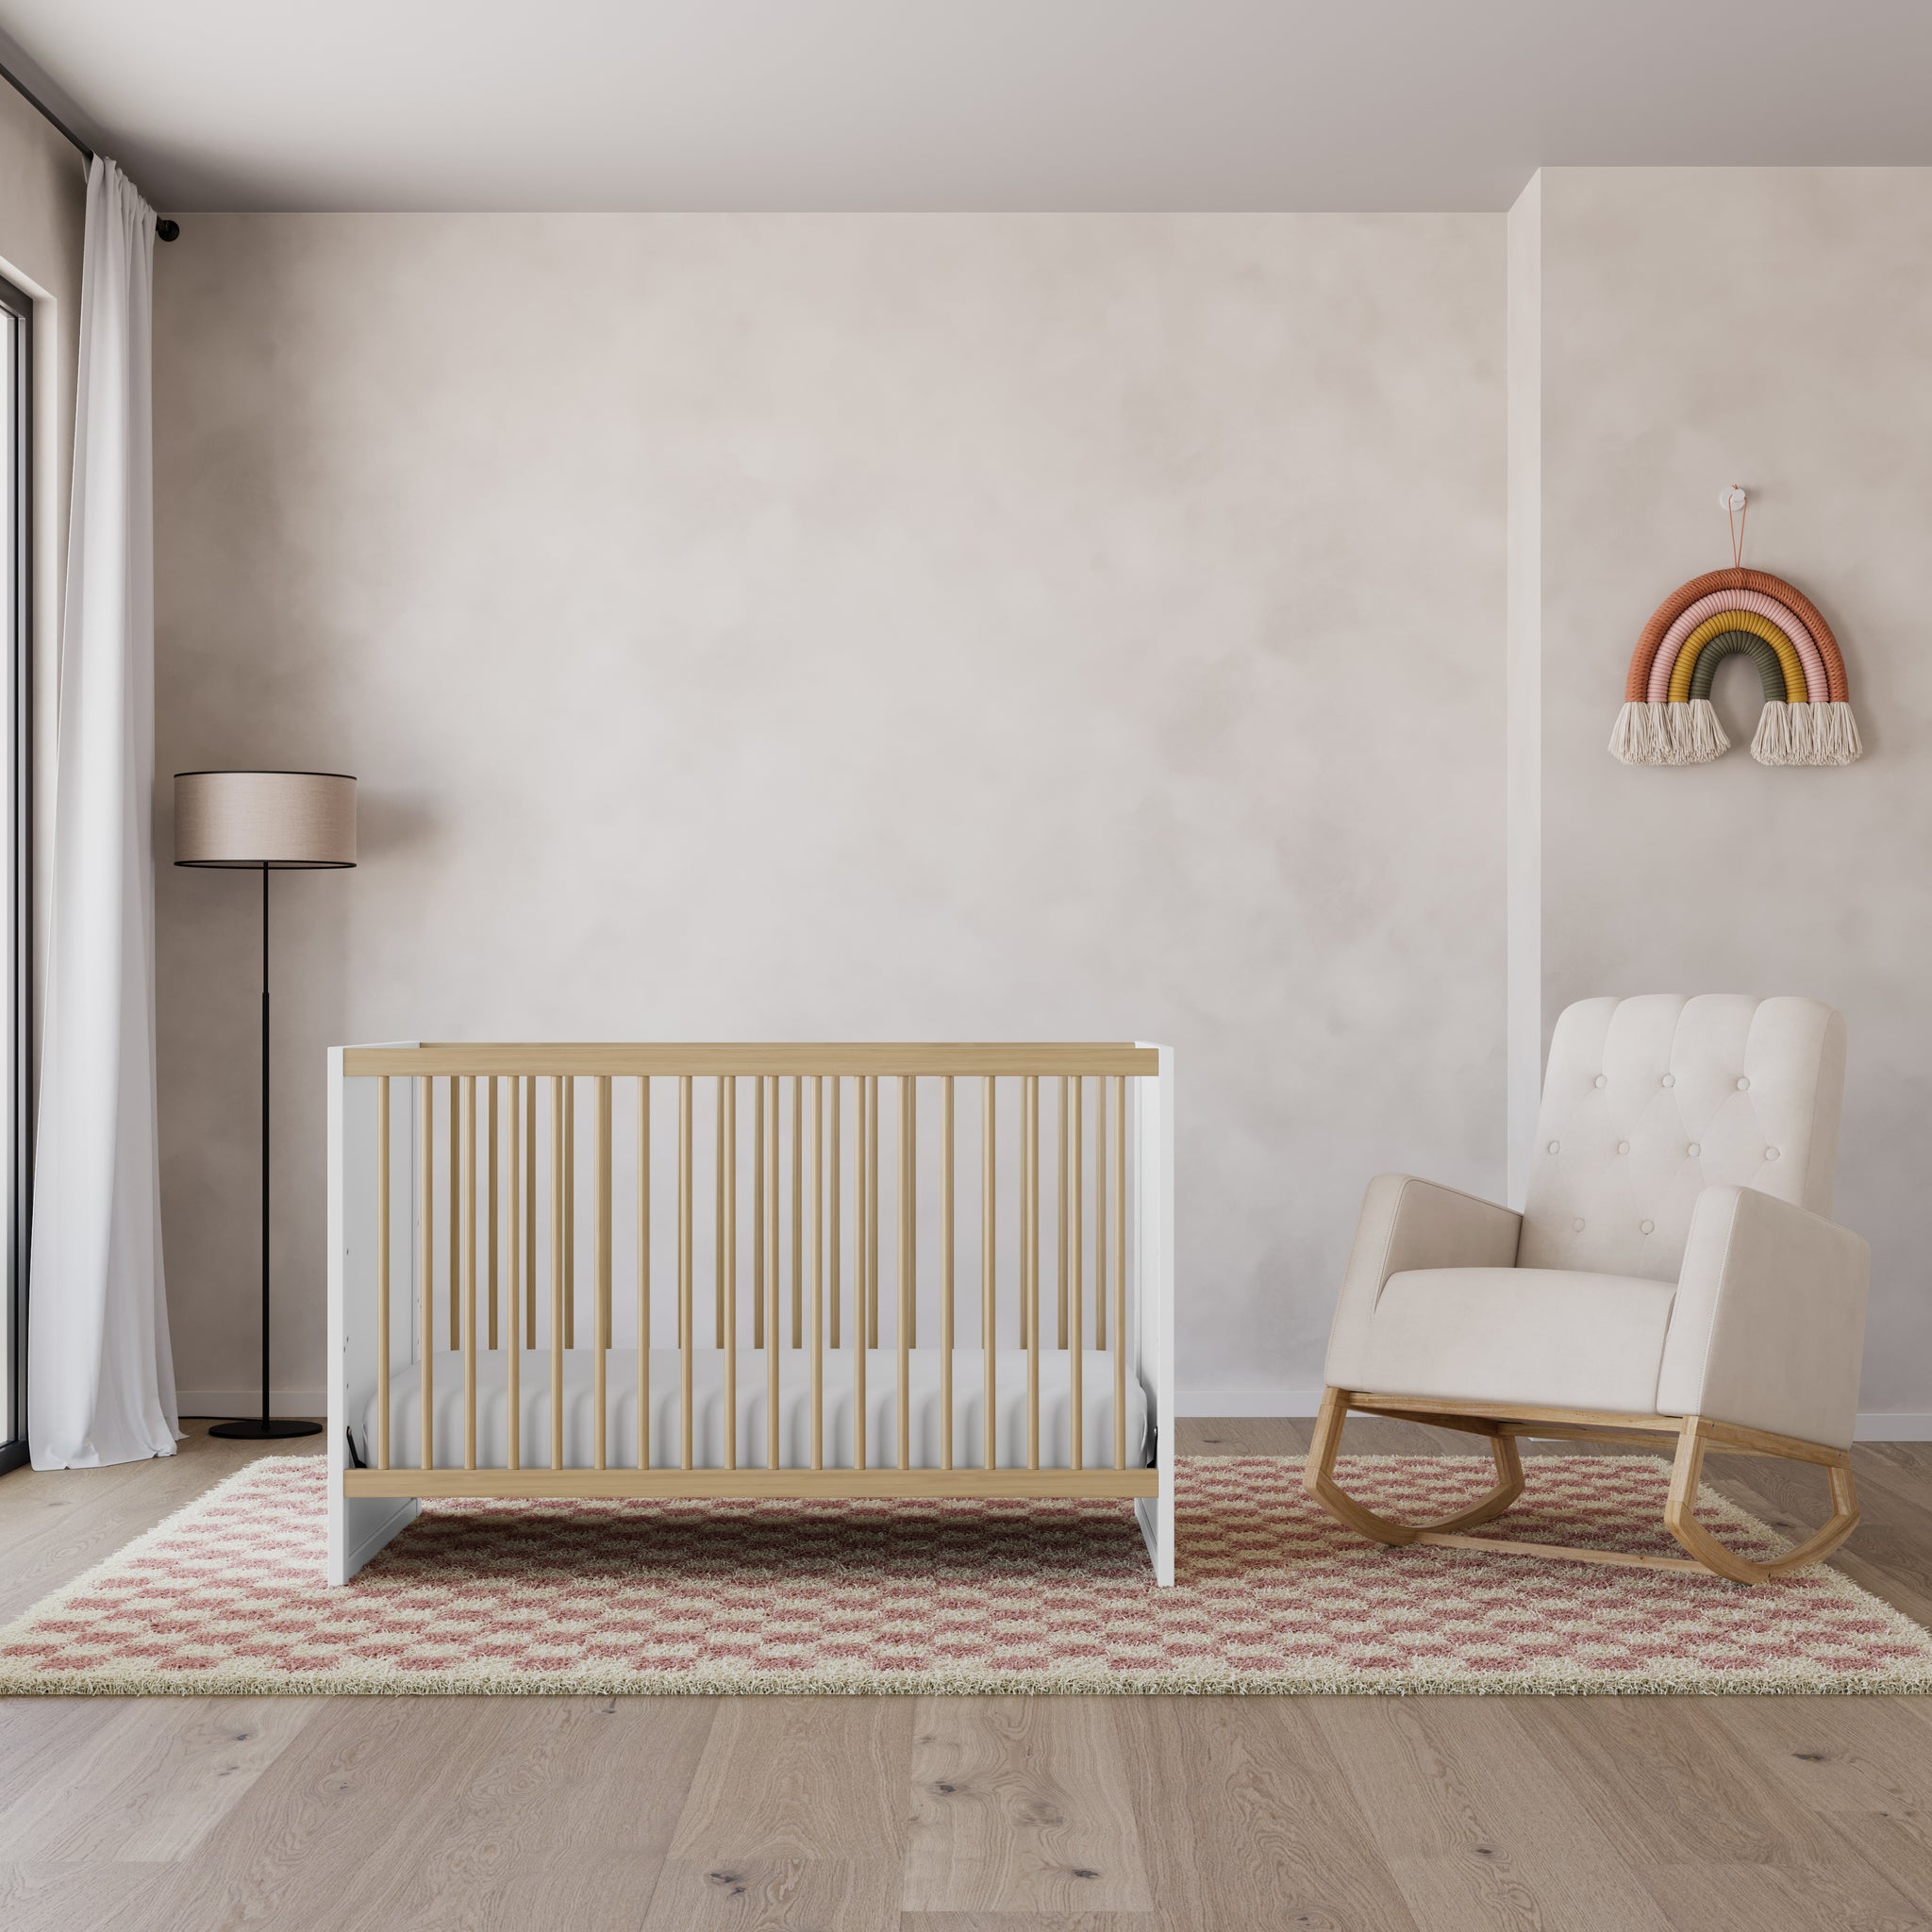 Two-tone white with natural wood baby crib, next to beige nursery rocking chair with natural wood base, in bedroom setting, surrounded by various decorative objects like a checkered rug, a lamp, and a hanging rainbow on the wall behind the chair